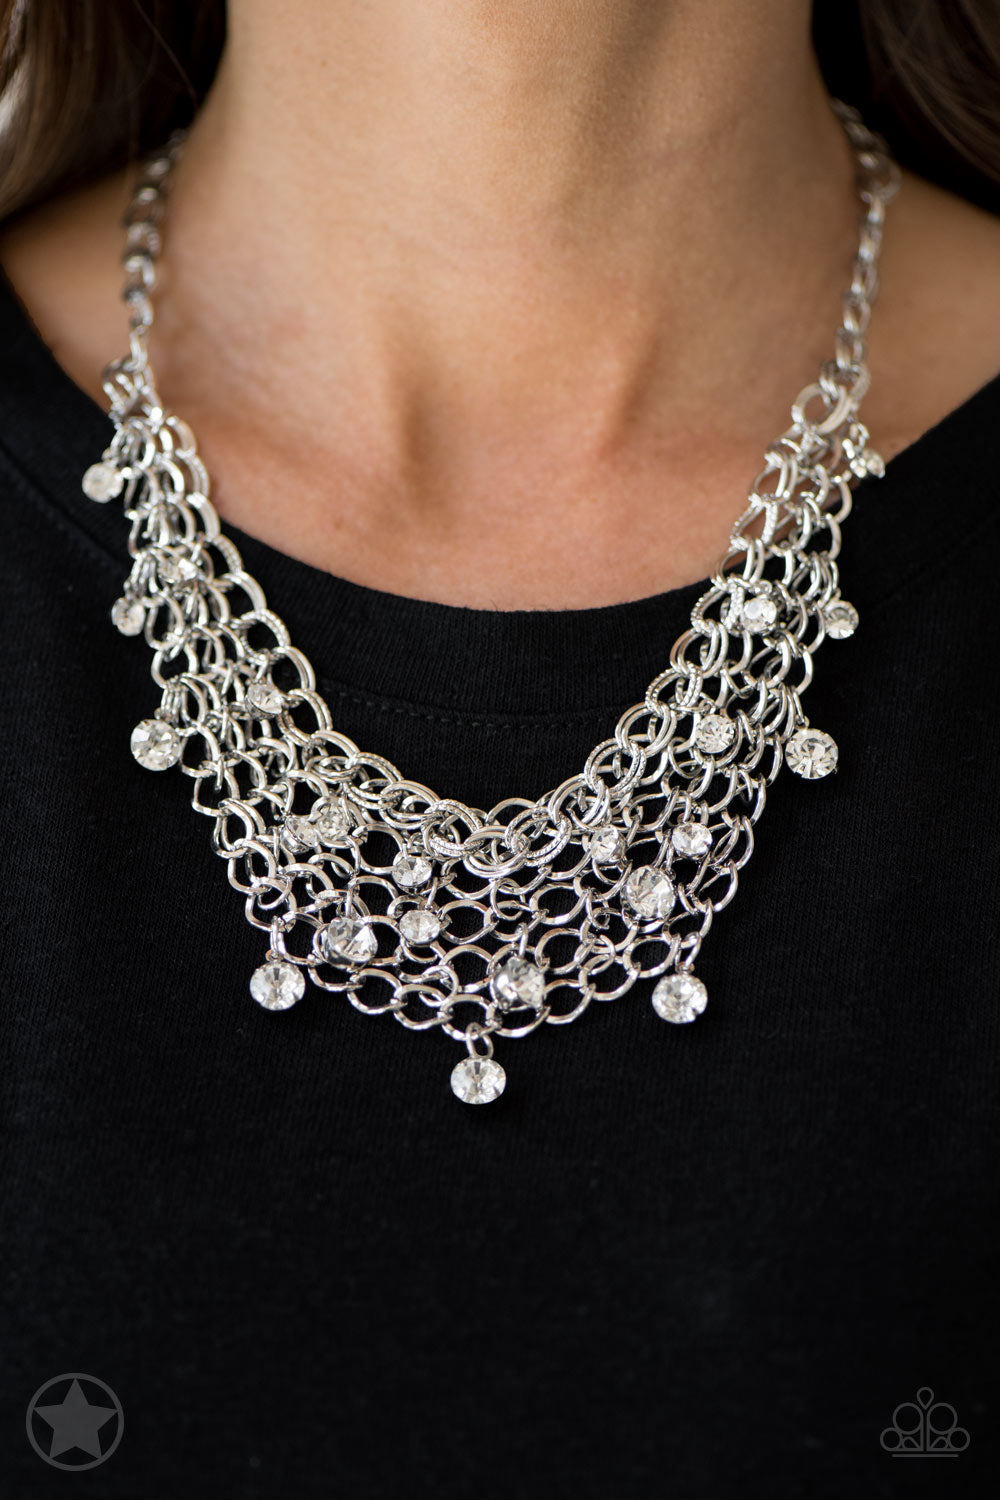 Paparazzi Accessories Fishing for Compliments - Silver Blockbuster Necklaces - Lady T Accessories